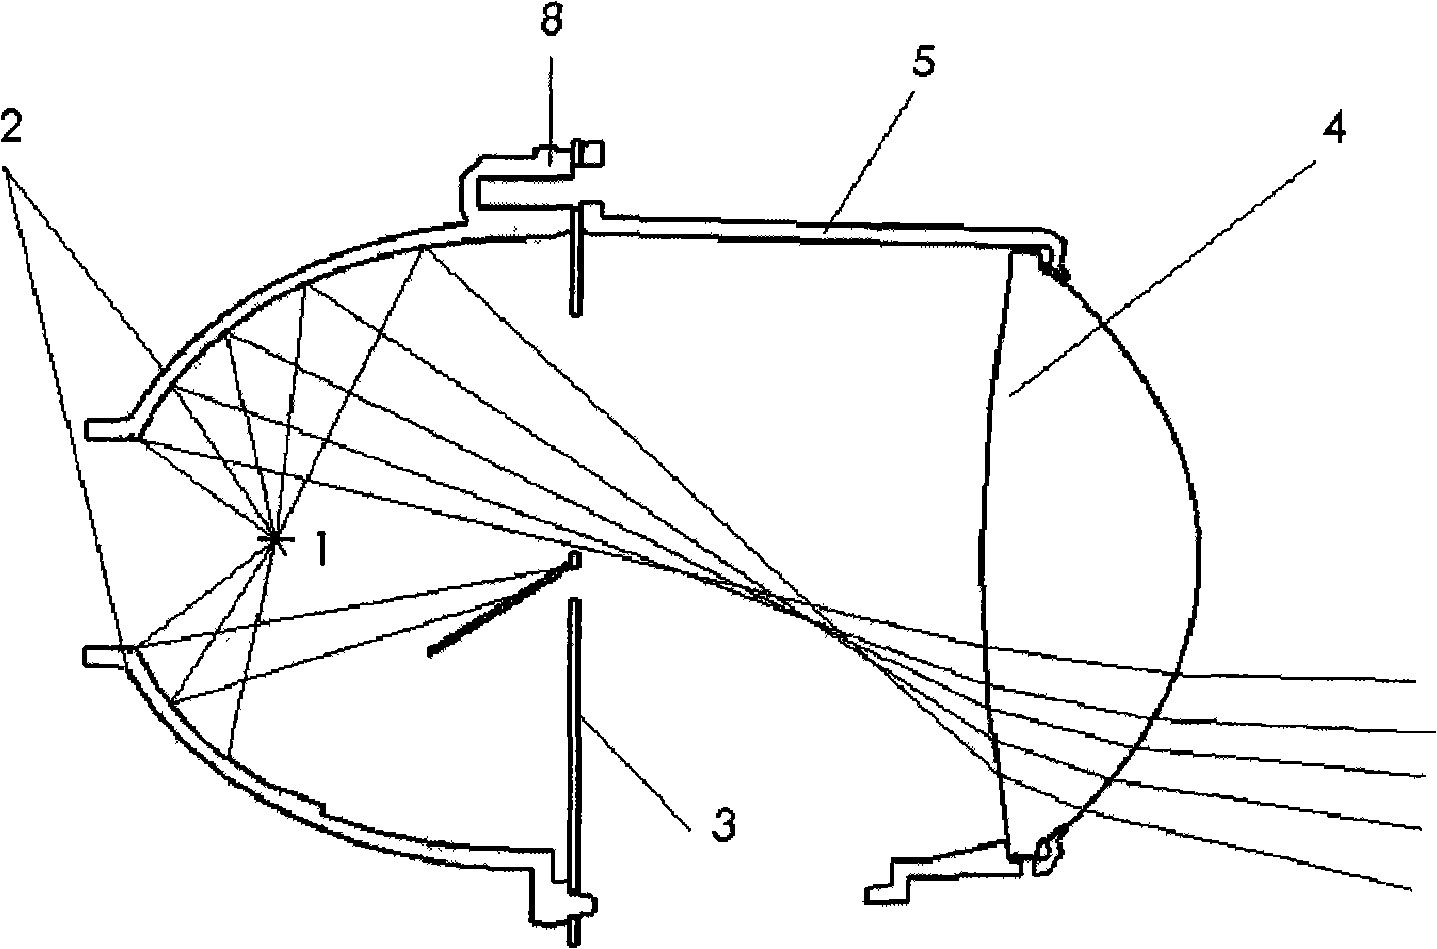 Automobile front shining lamp based on double-convex lens